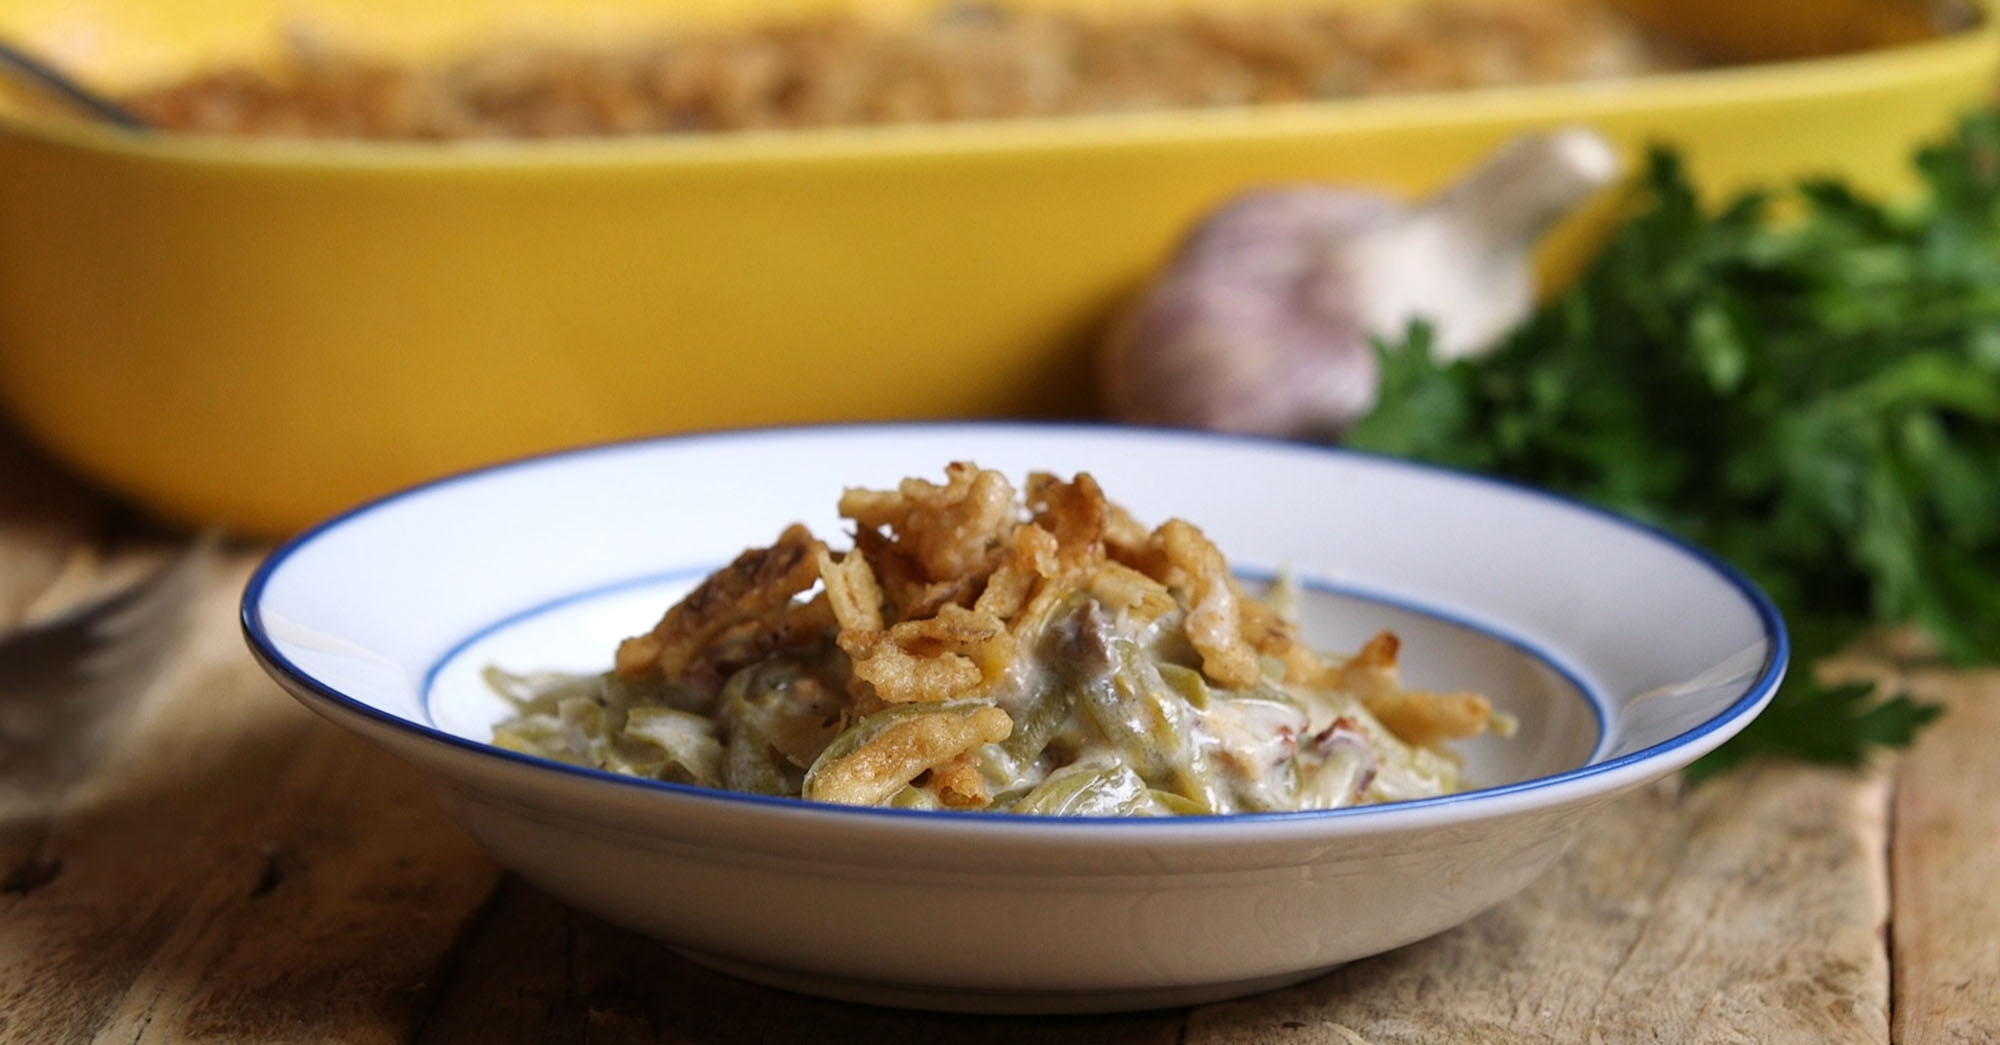 Creamy Crunchy Green Bean Casserole Should Be on Every Holiday Buffet ...